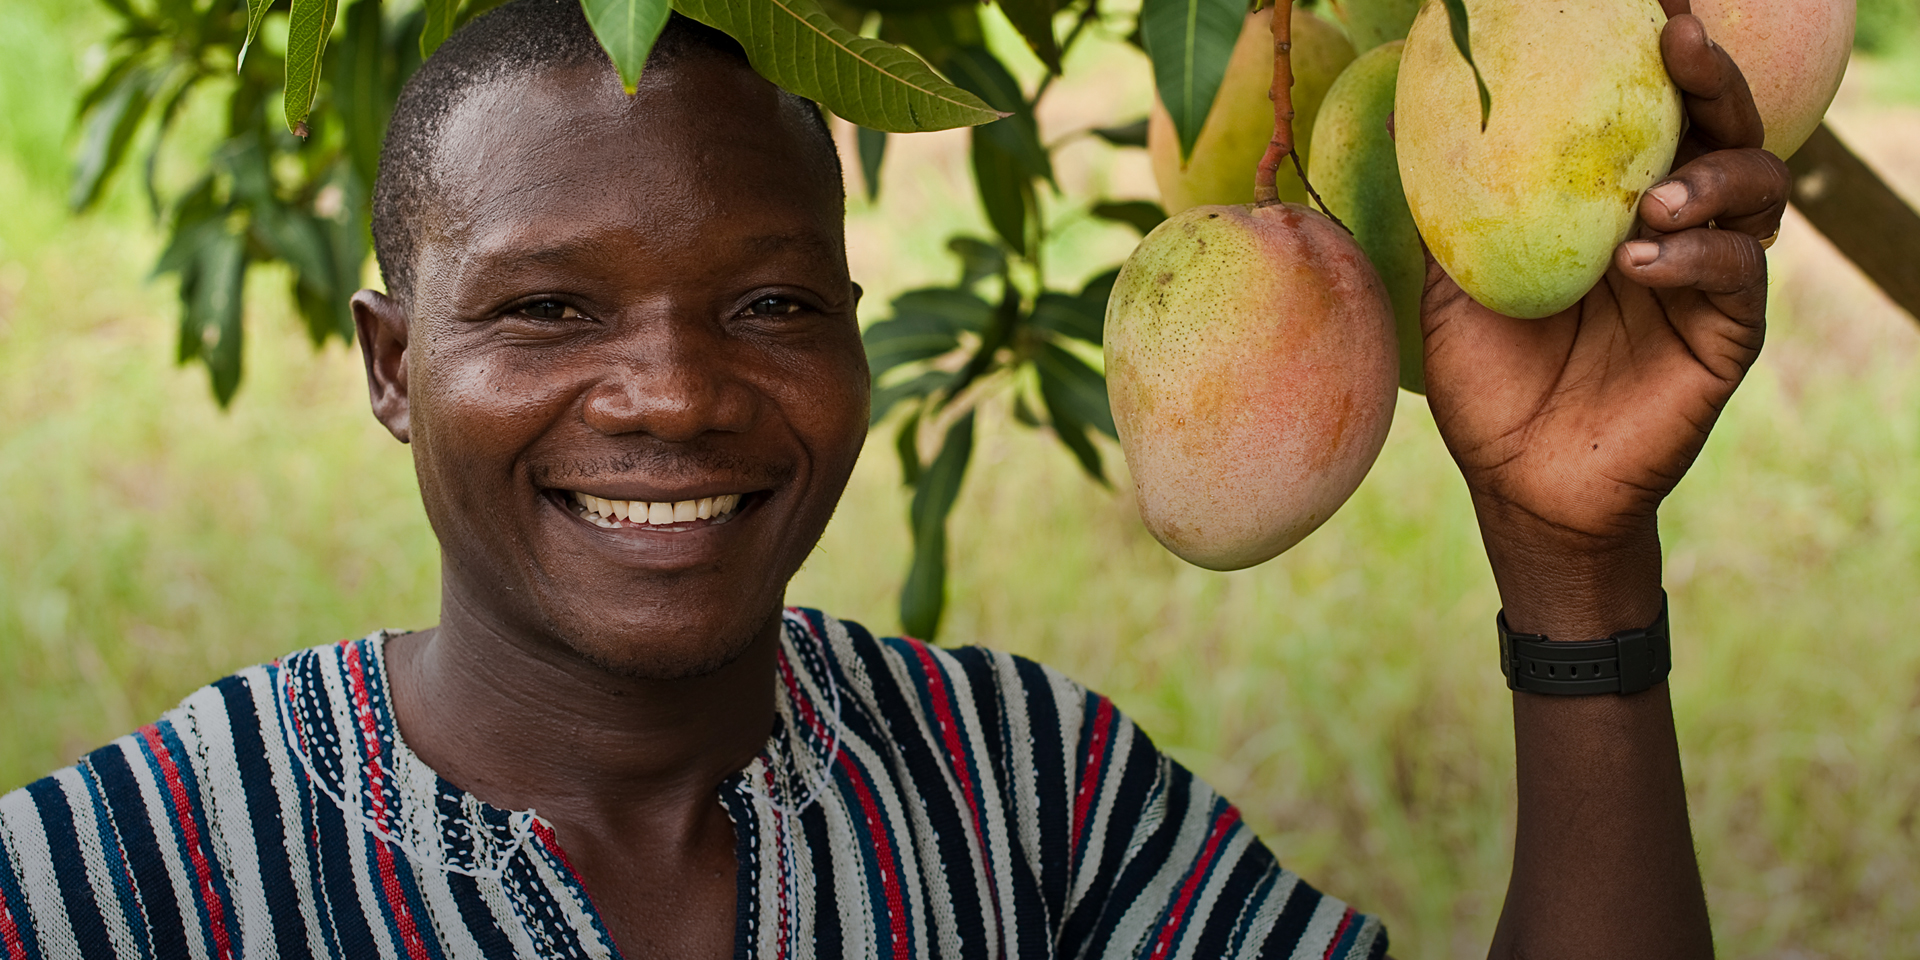 A man smiling and standing next to a mango tree, holding one of the fruits in his hand.